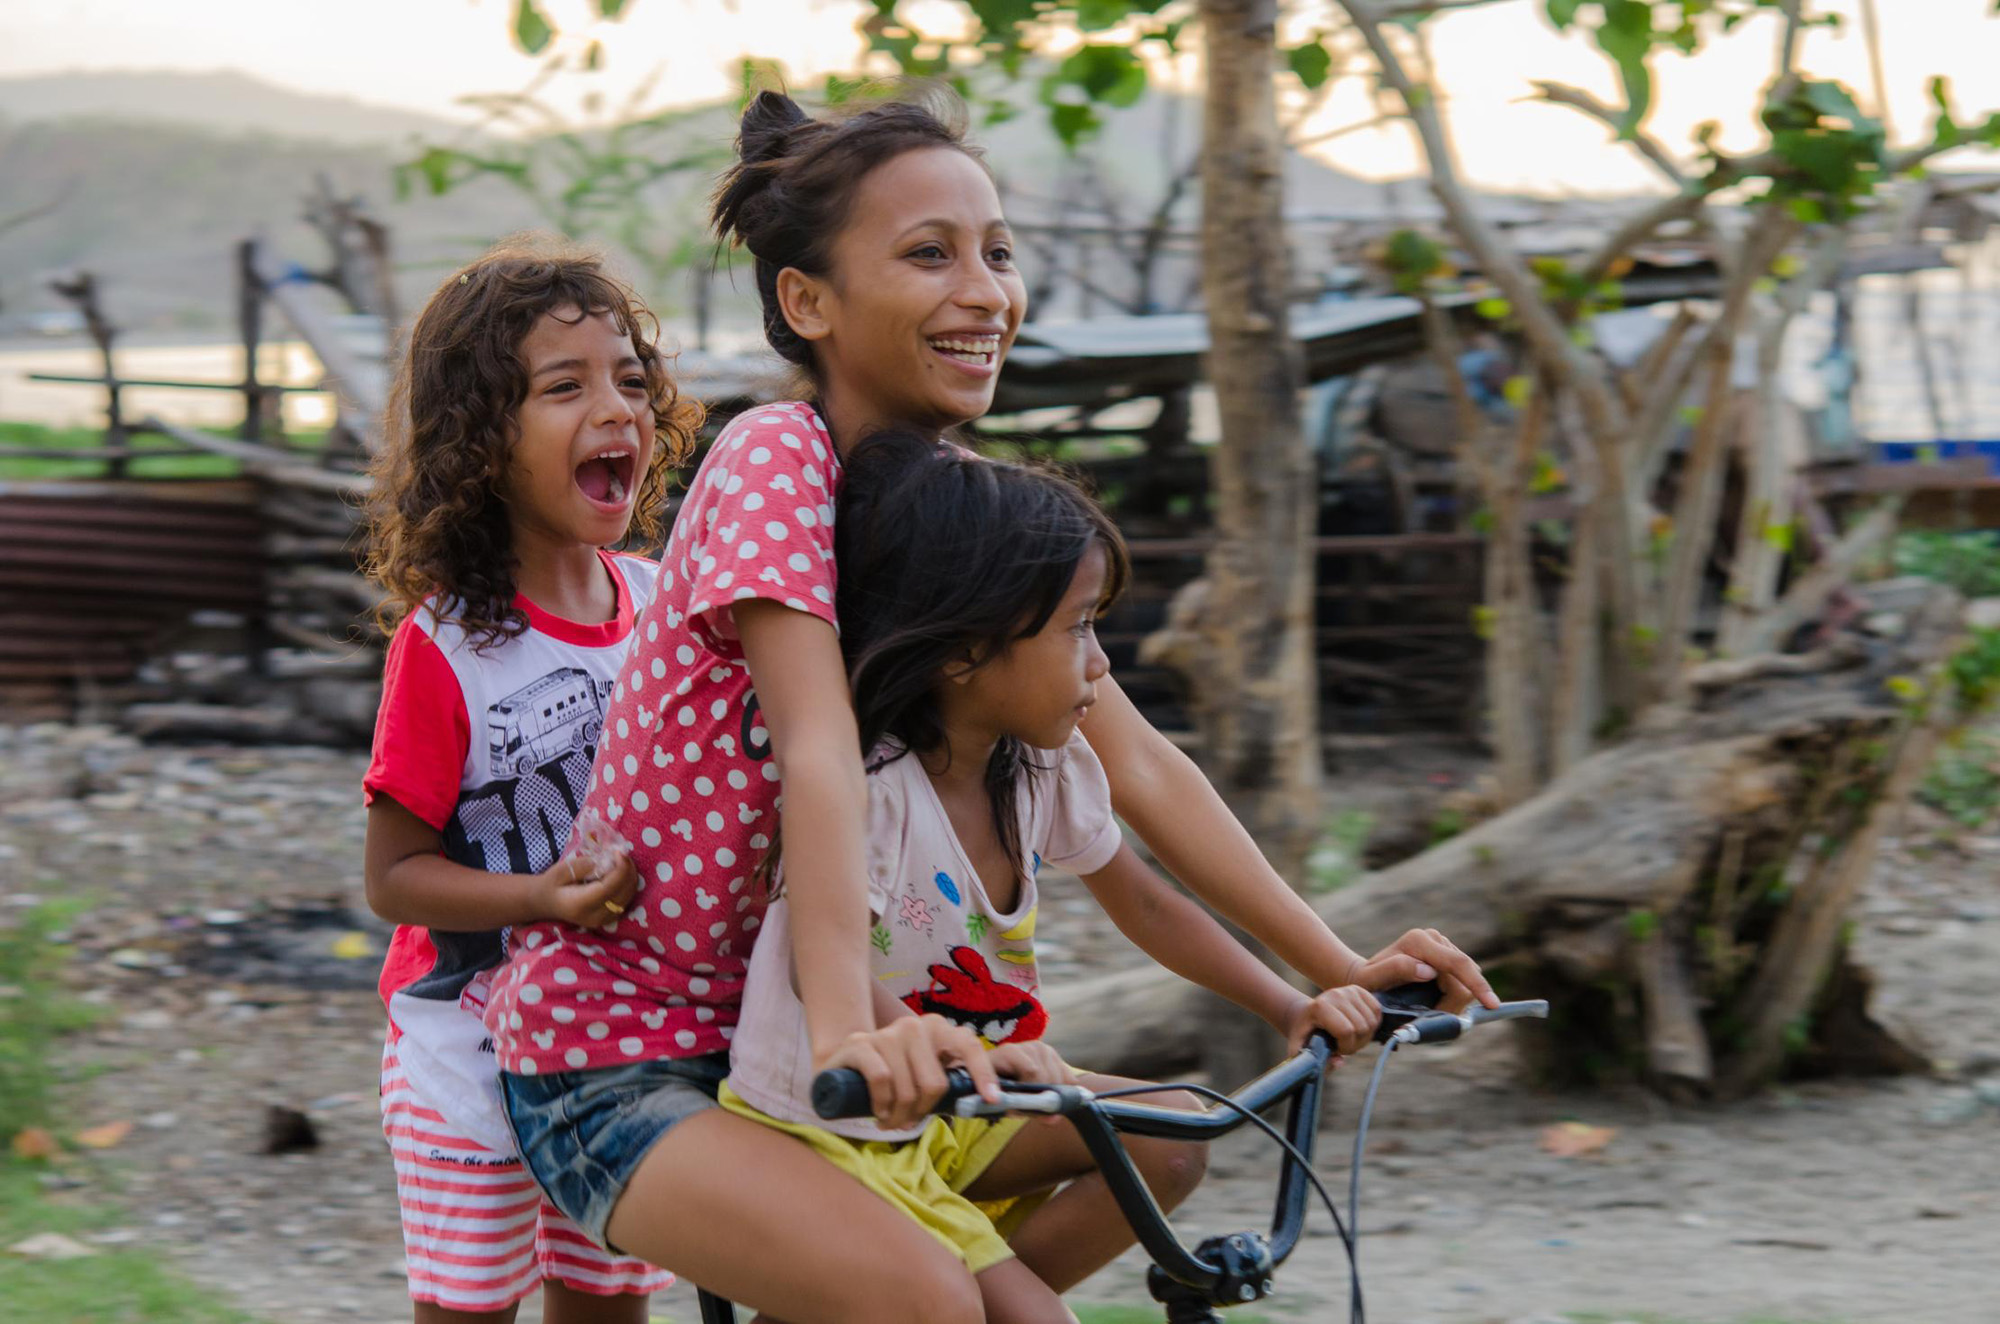 Three girls riding on the same bicycle in Timor Leste.